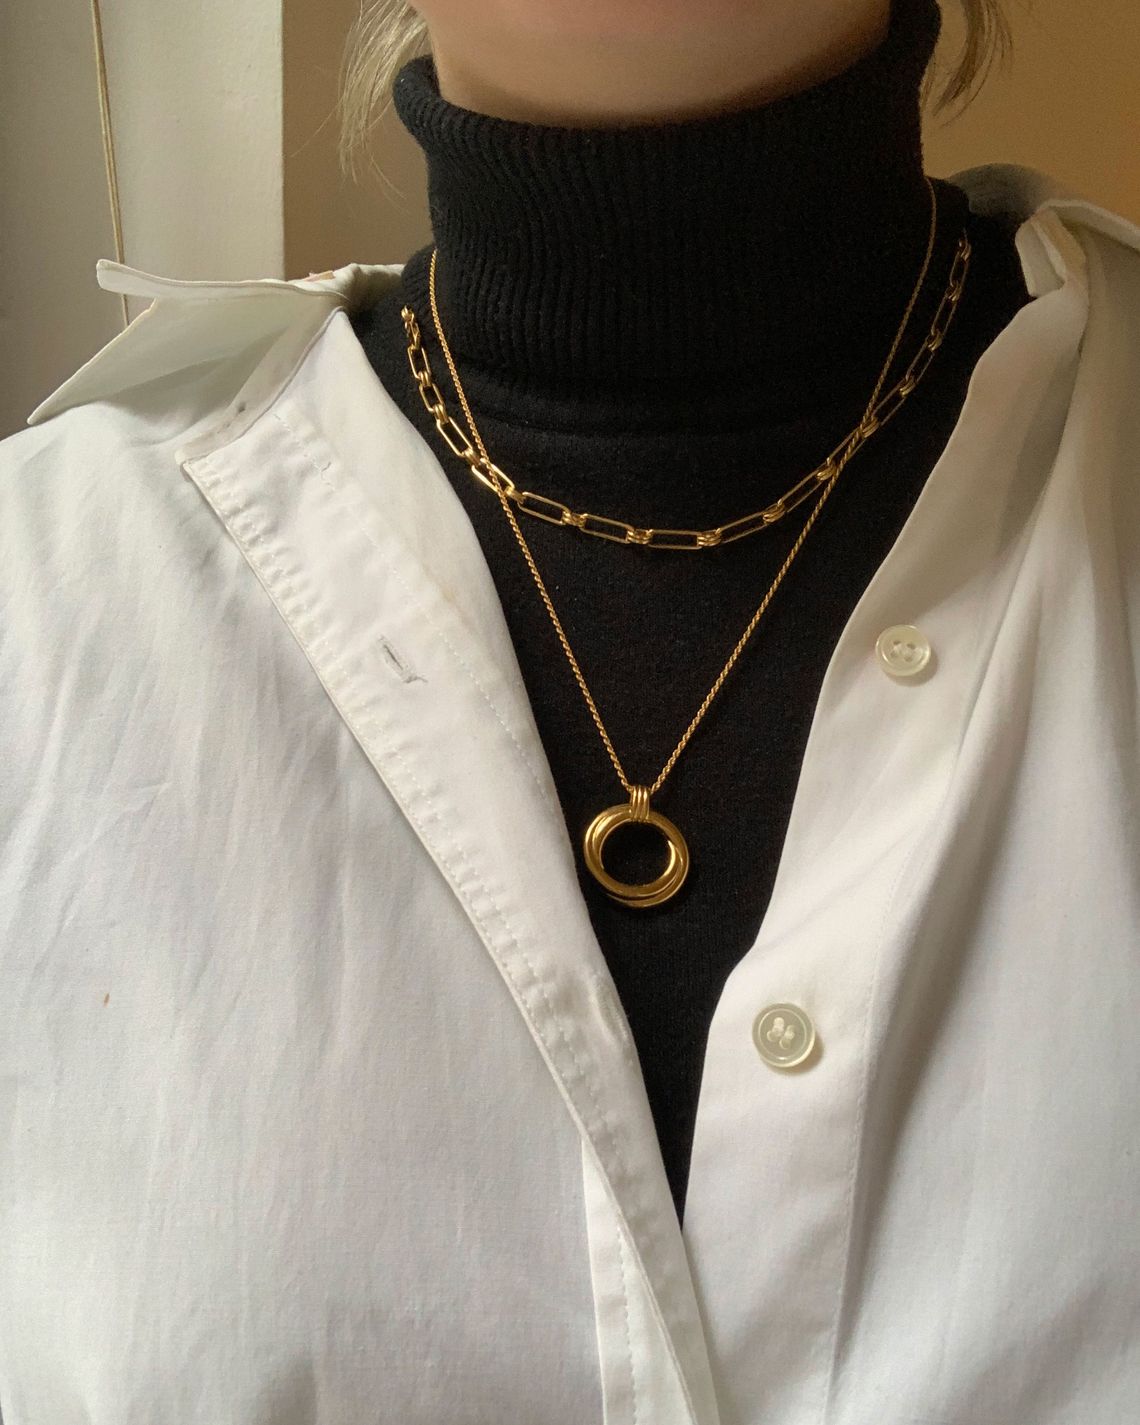 How To Pull Off Wearing Necklaces With Turtlenecks, According To A Stylist  | HuffPost Life